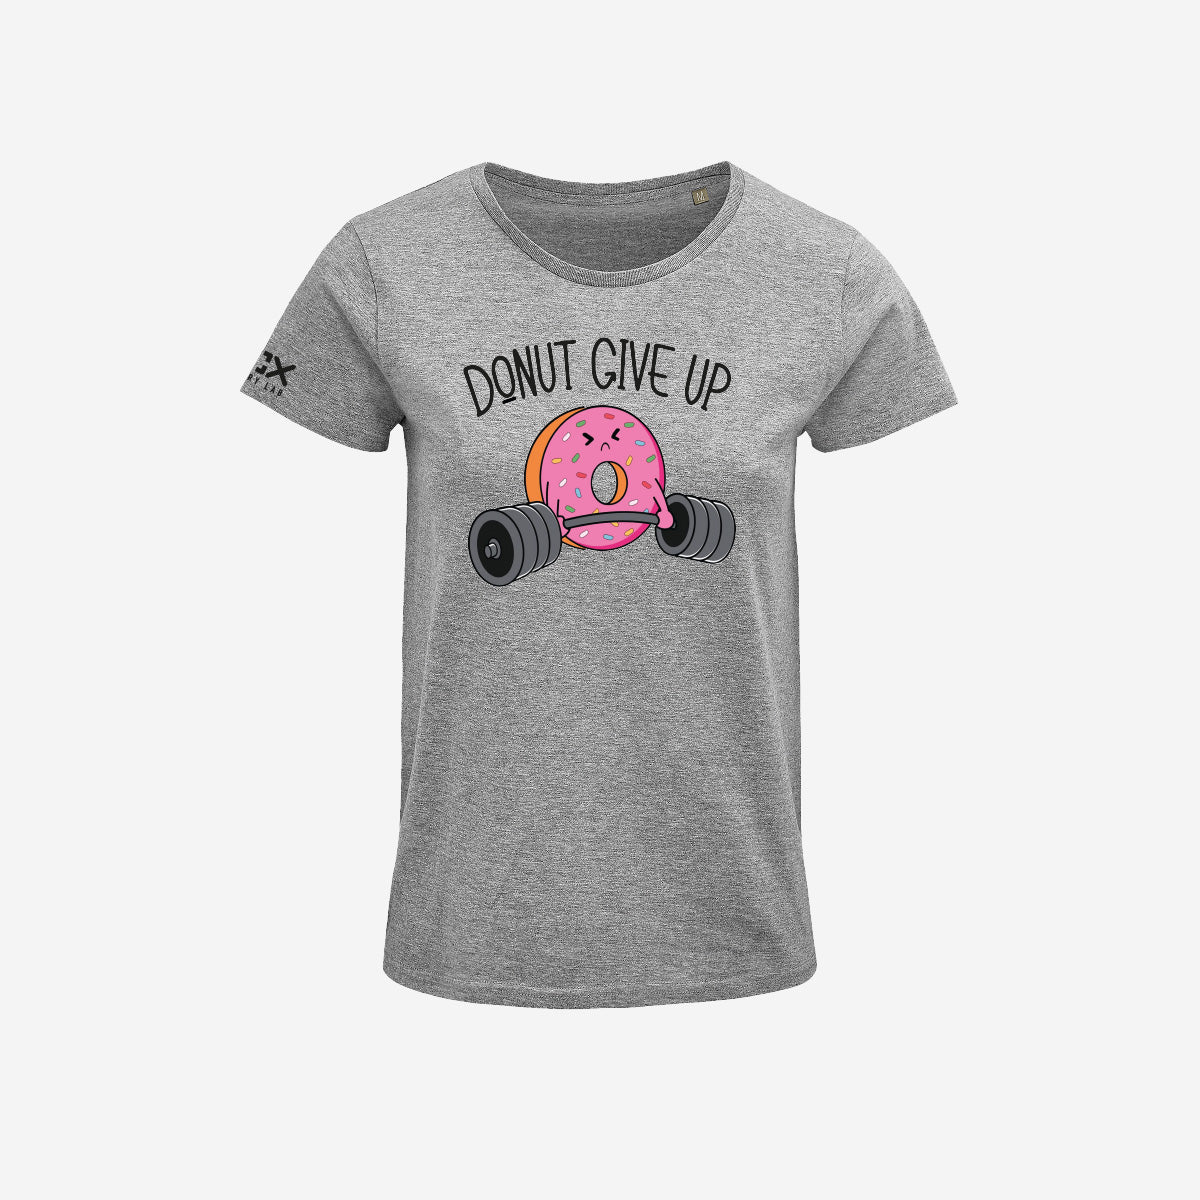 T-shirt Donna - Donut give up